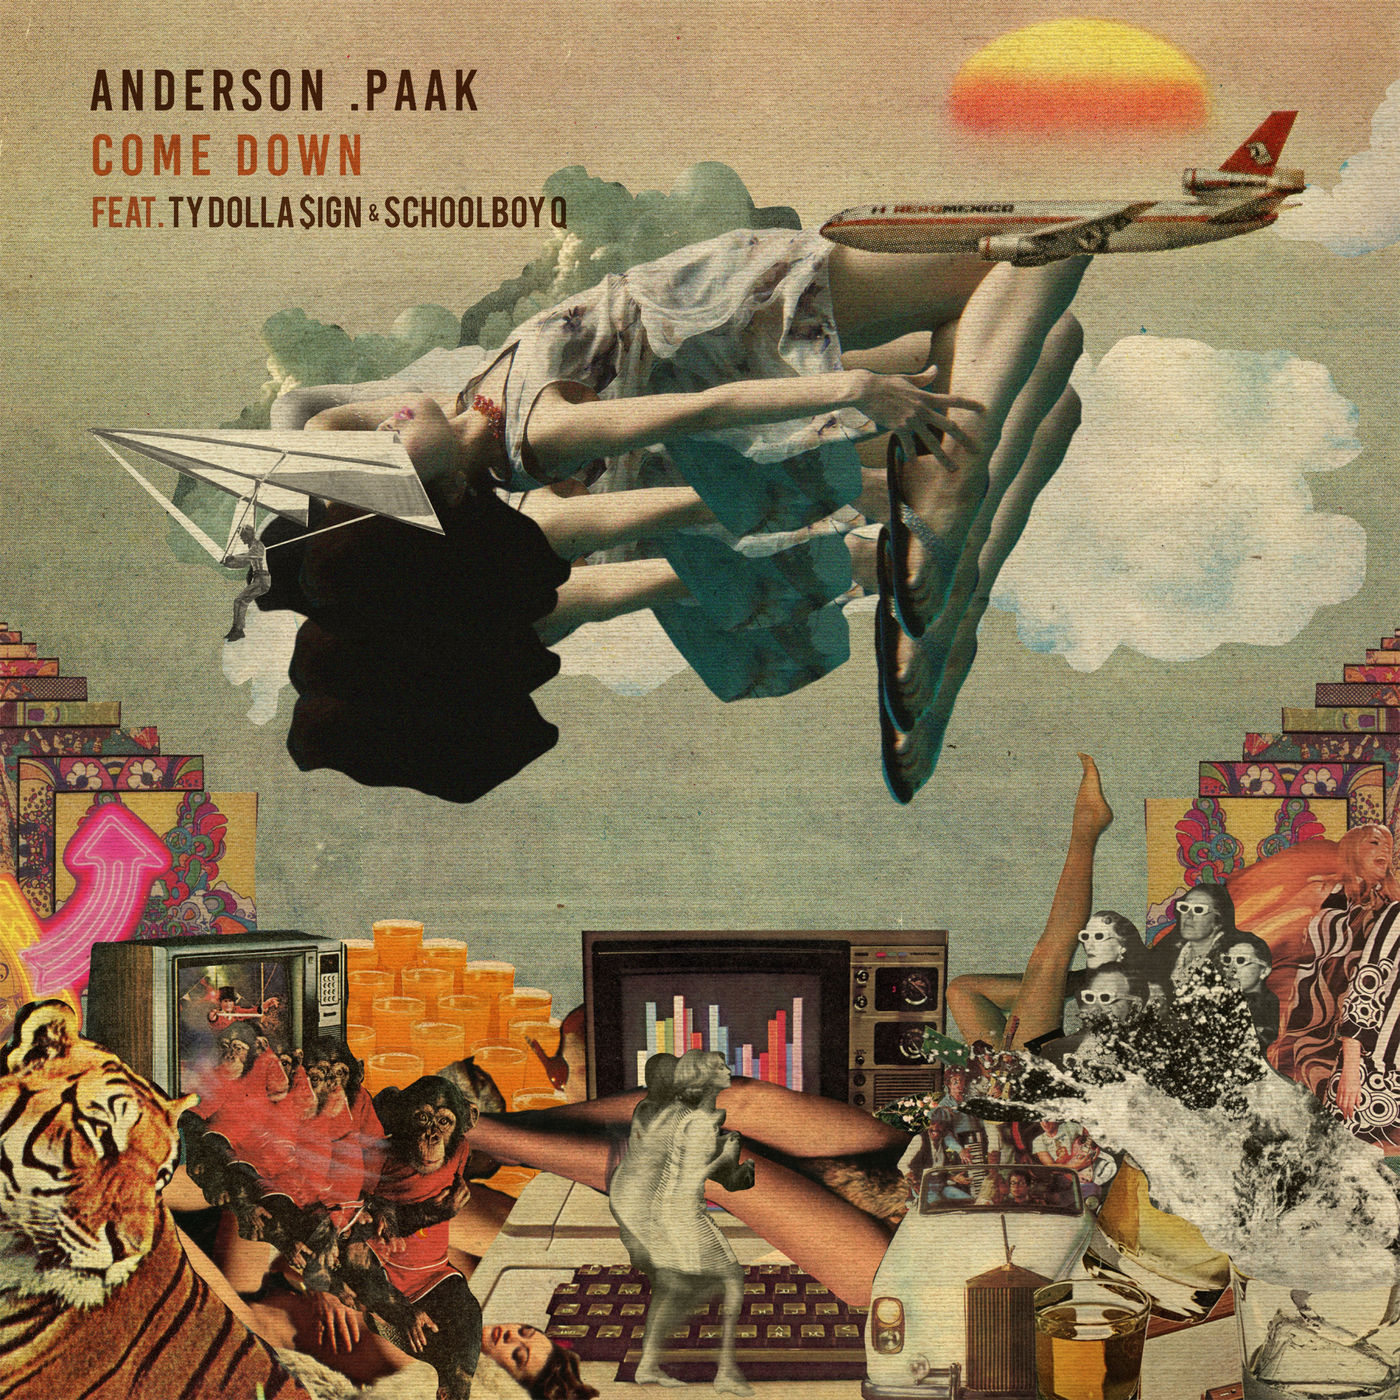 New Music: Anderson .Paak – “Come Down” (Remix) Feat. Ty Dolla $ign & ScHoolboy Q [LISTEN]